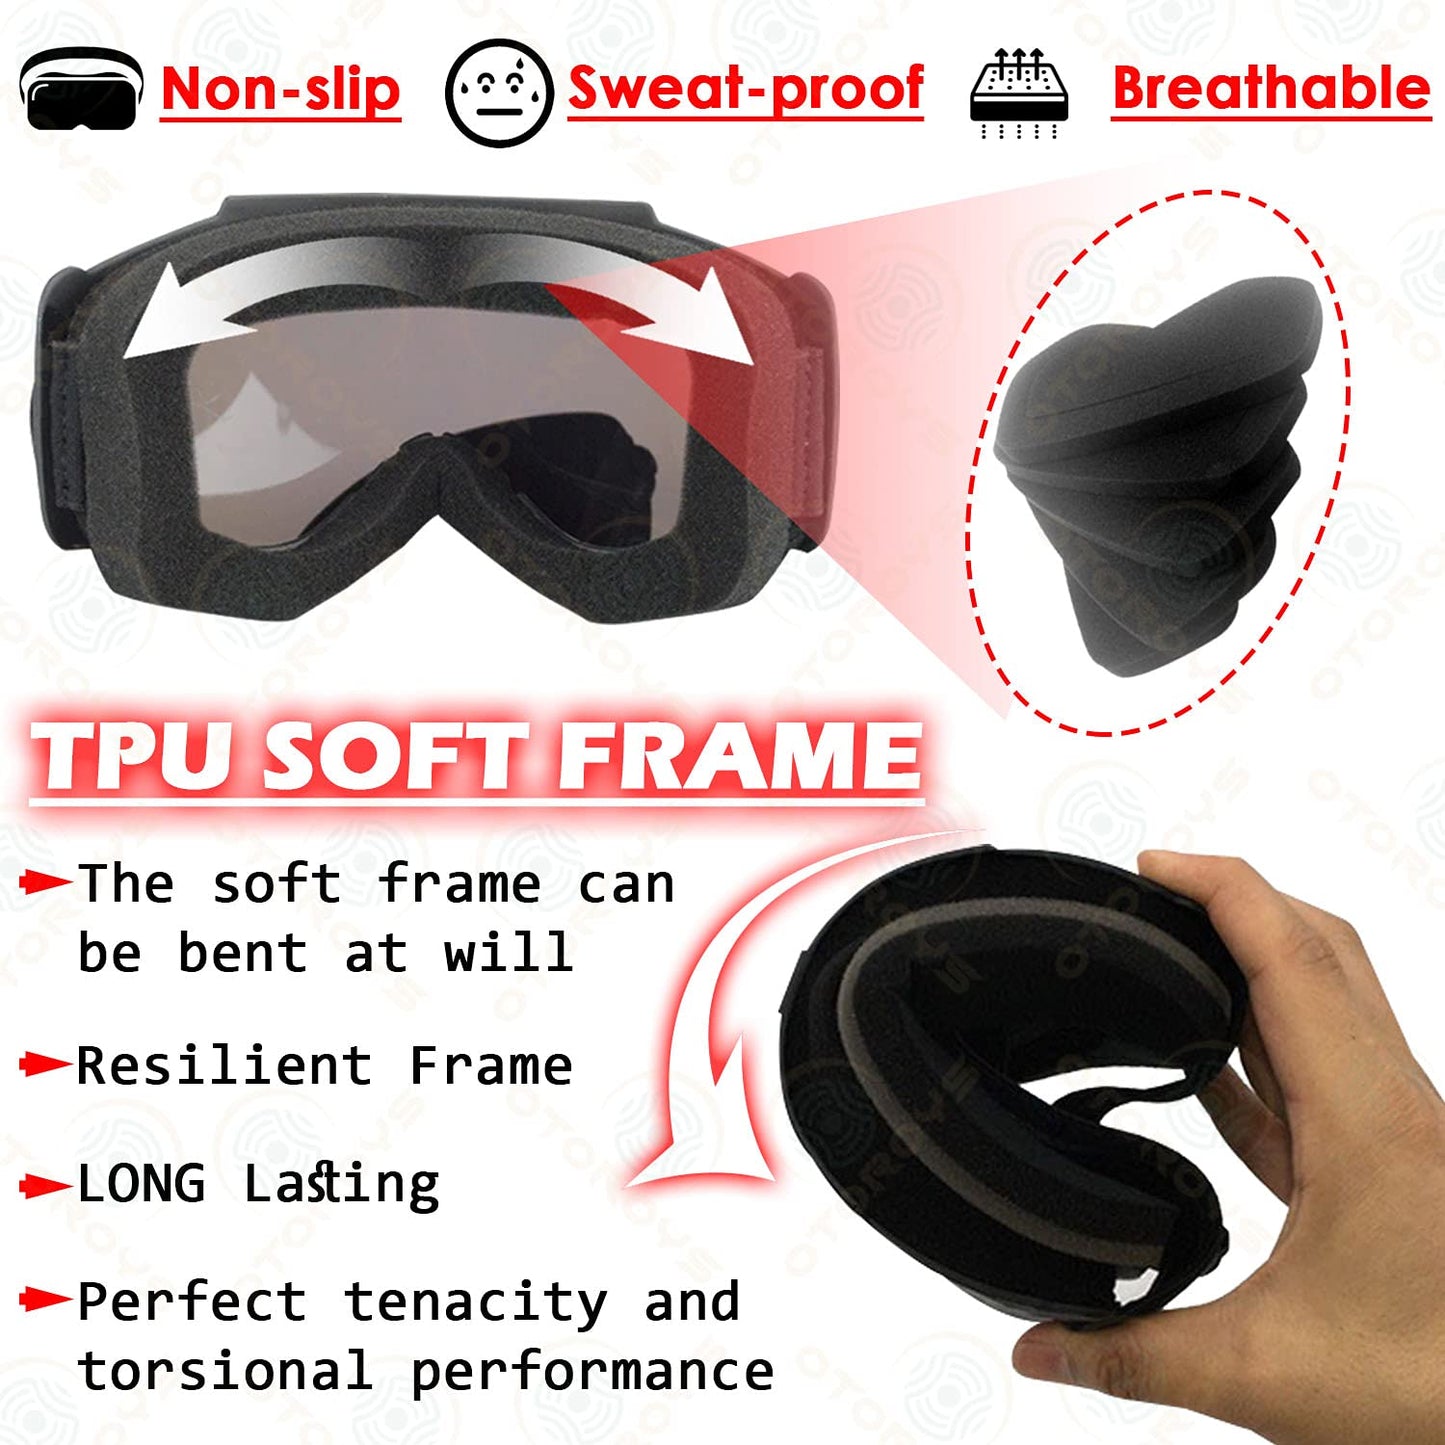 Motorcycle Goggle mask Anti Scratch UV Protective Face Mask, Bike Riding Goggles Mask With Detachable Face Mask, Adjustable Elastic Strap Goggles Mask For Helmet - Rainbow Visor